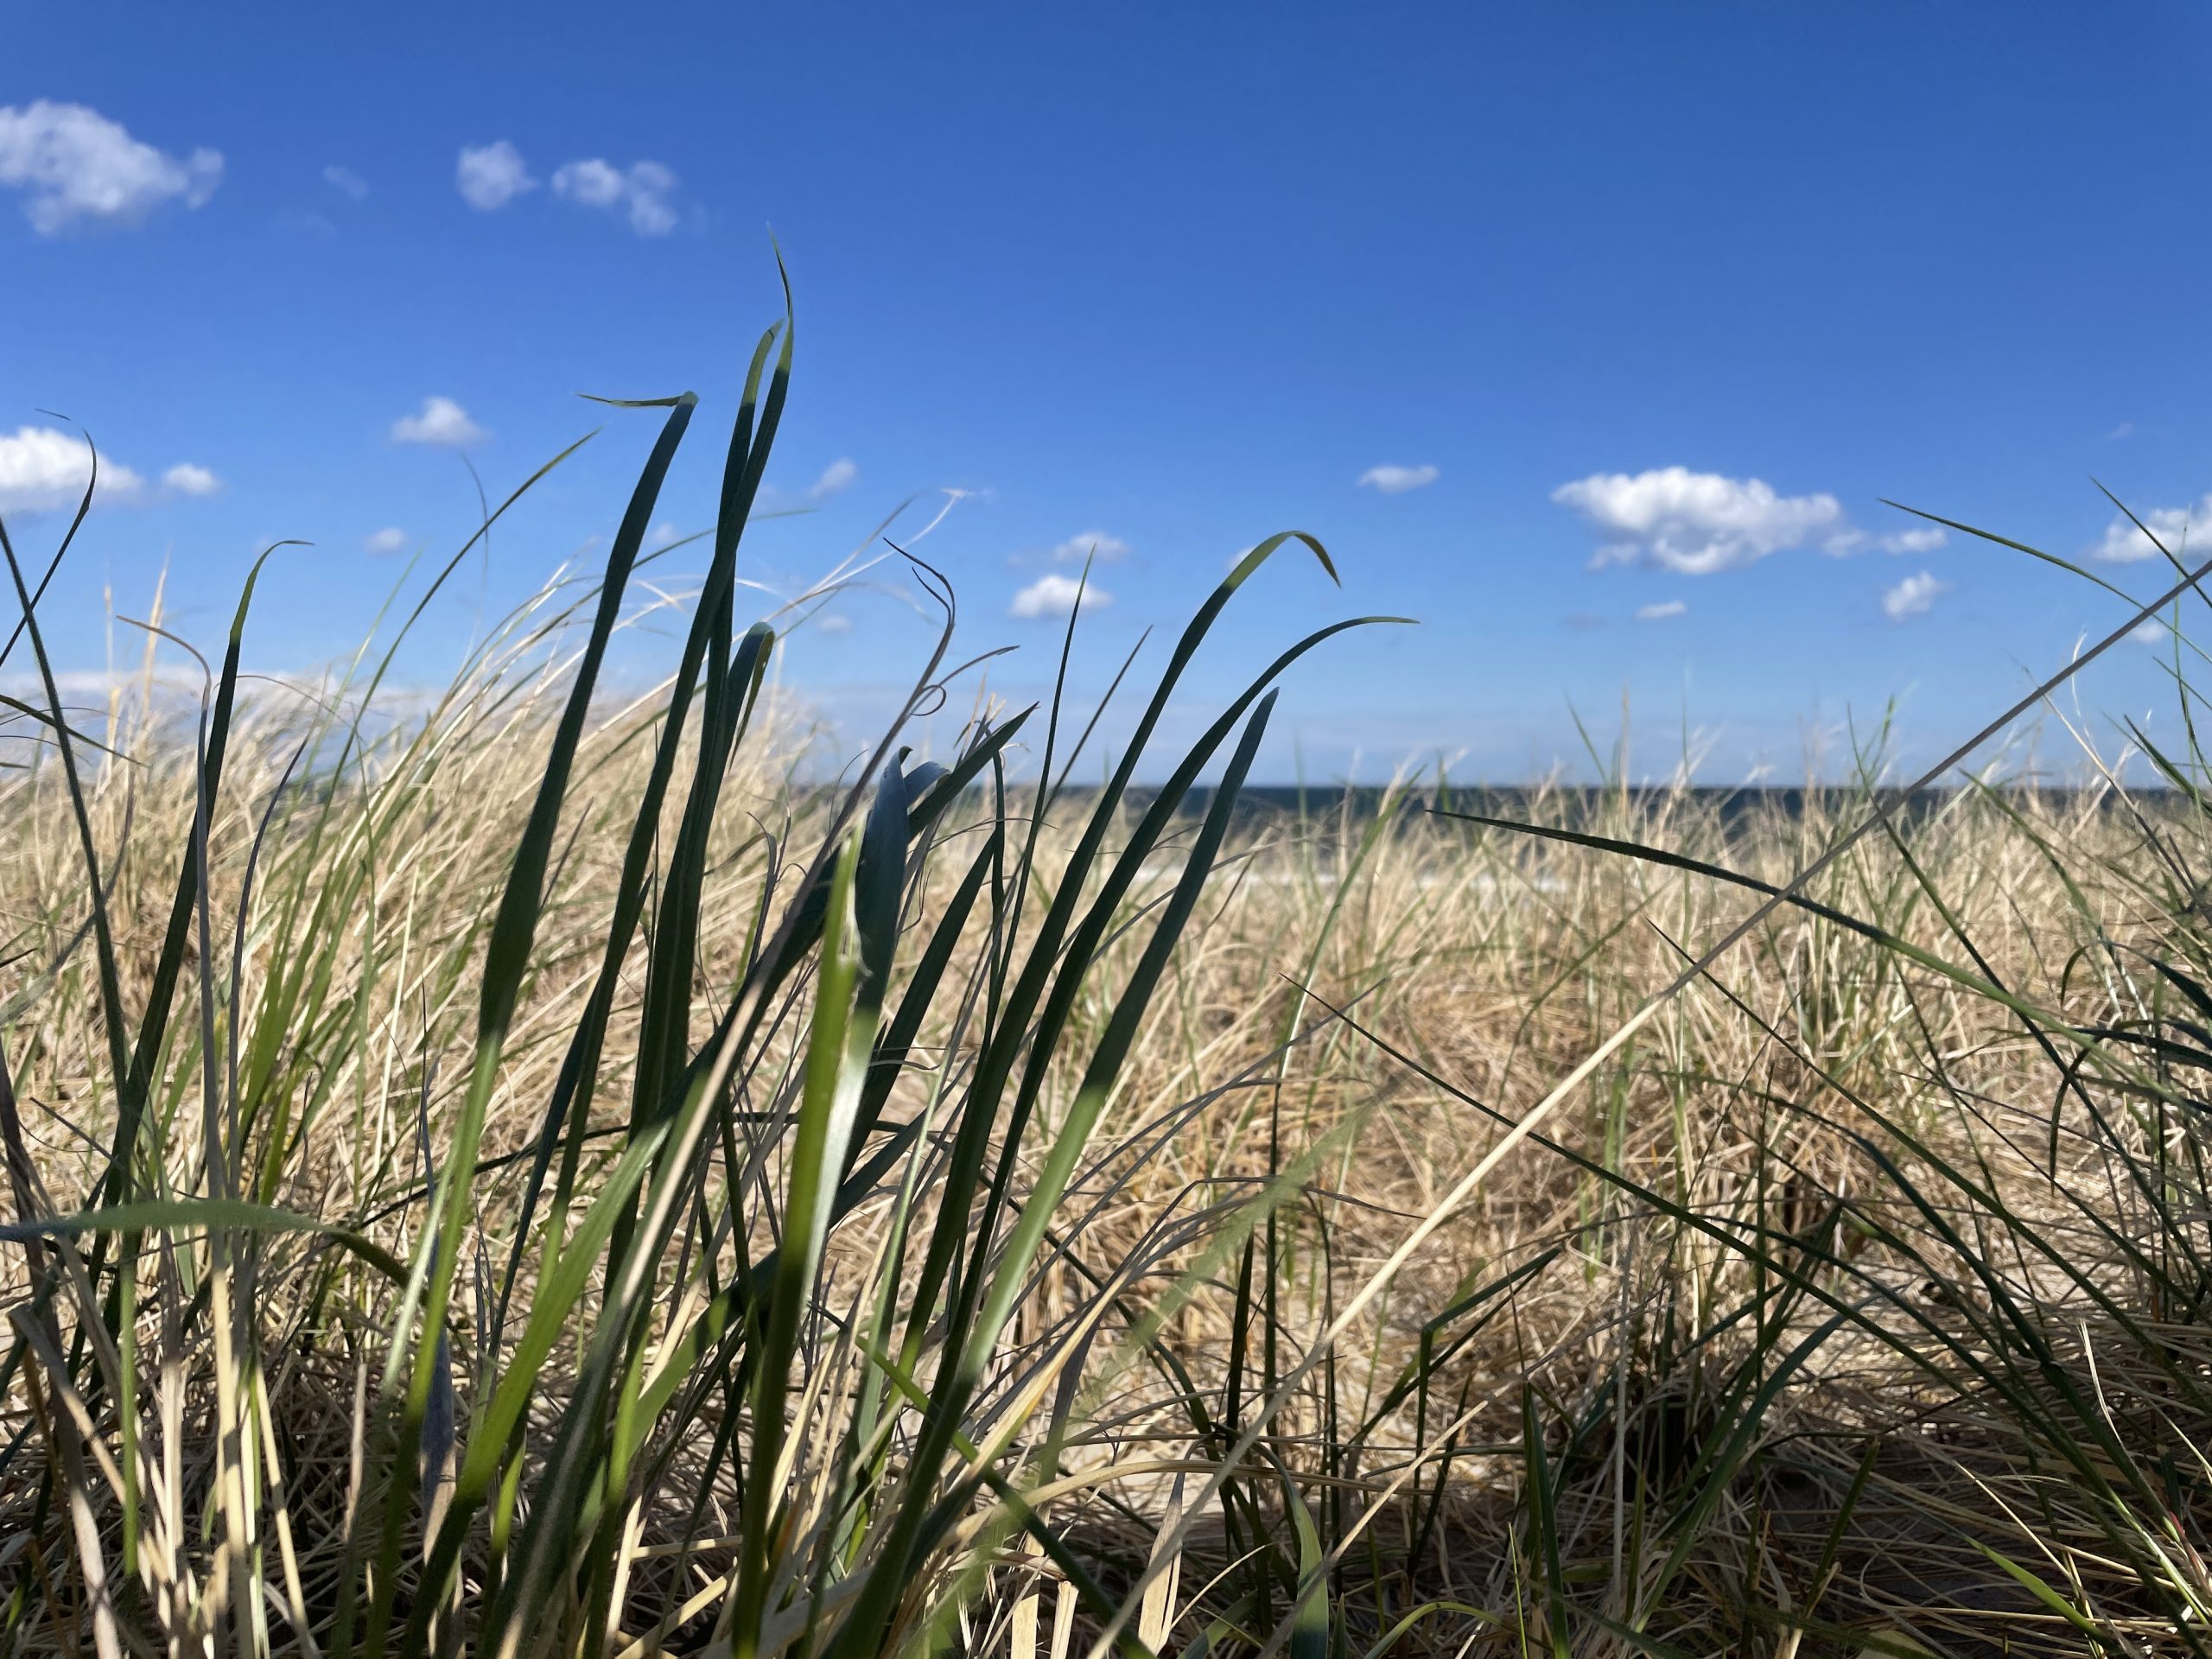 Dune grass whipped up by high winds, April 20, 2021. (Photo: Daniel Nee)